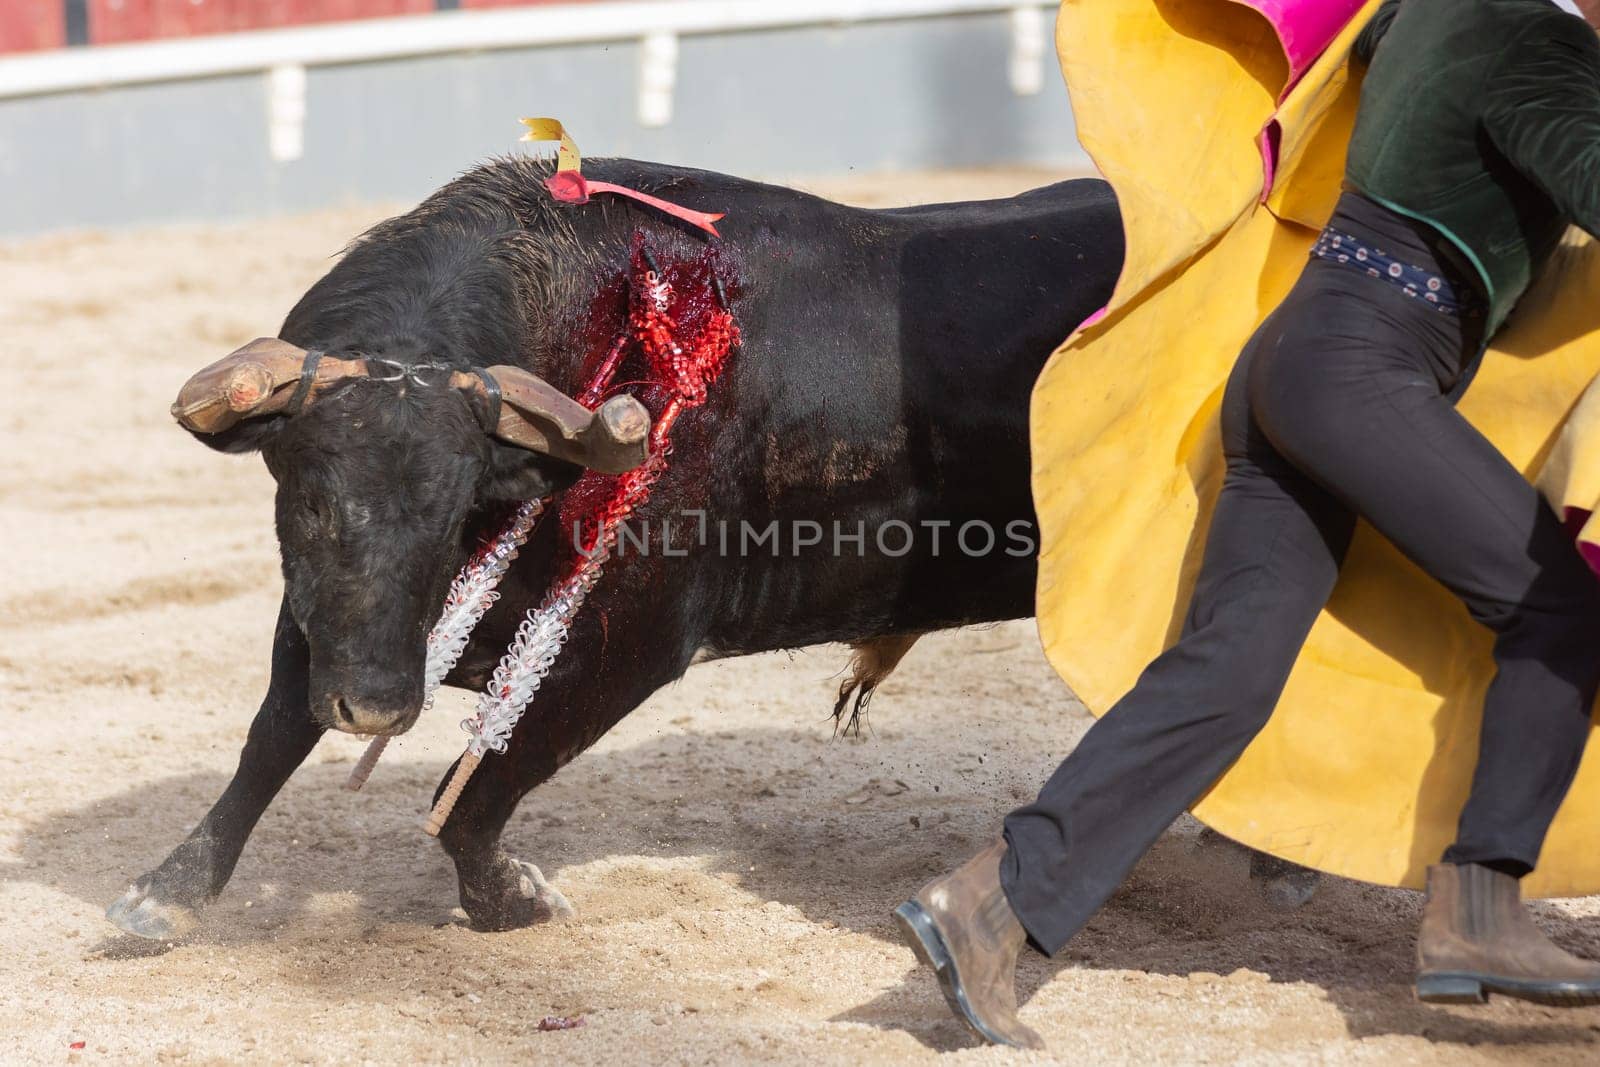 Tourada - an injured bull fighting a man on the arena by Studia72